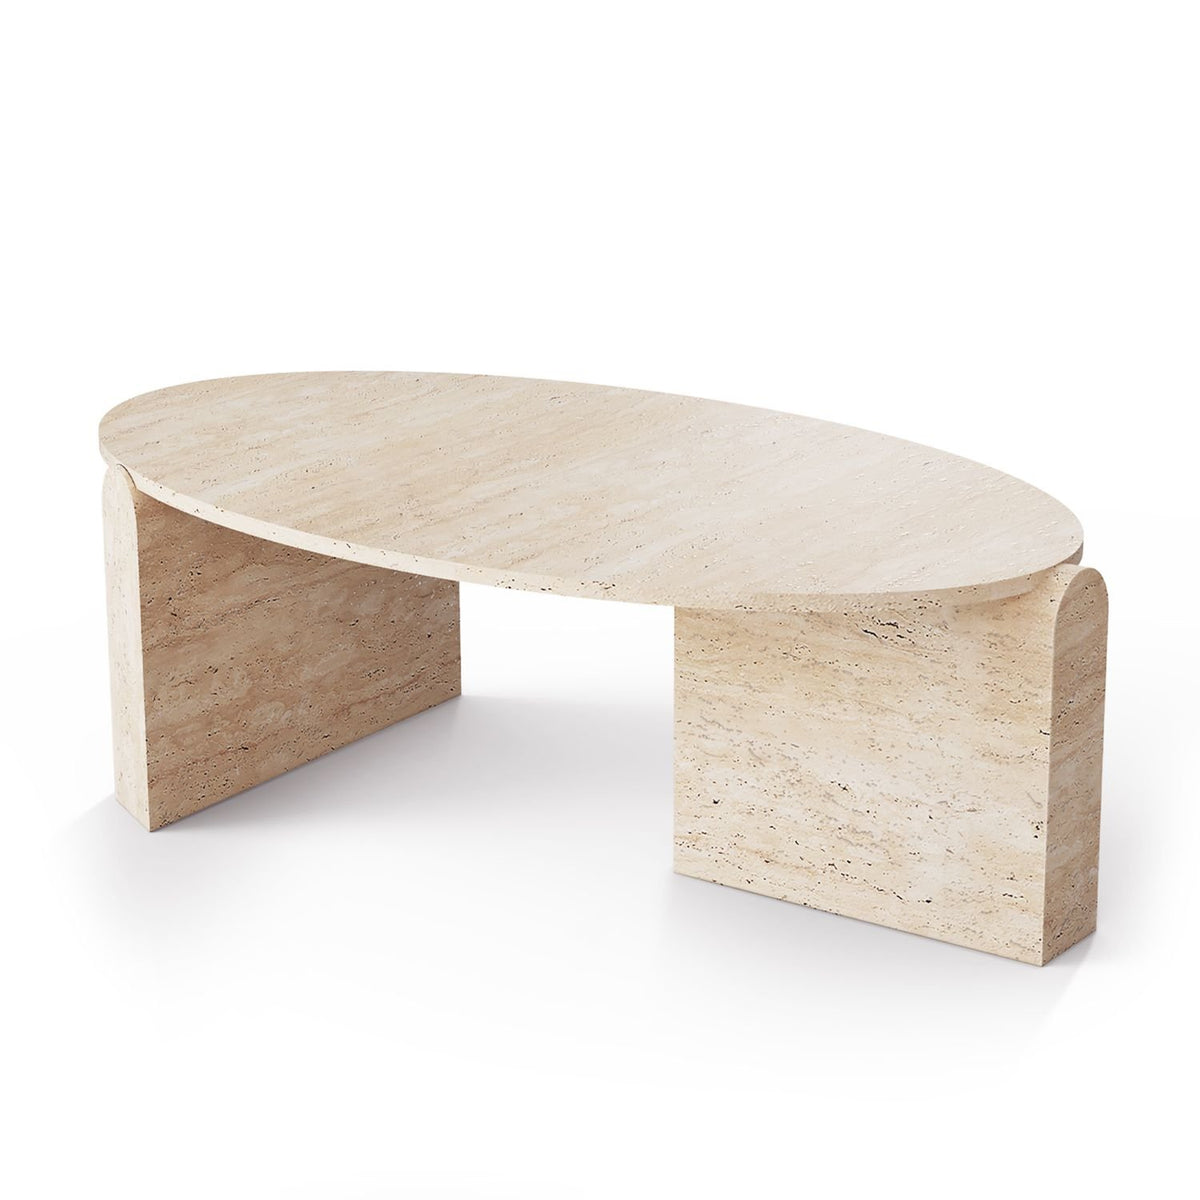 Jean Center Table by Mambo Unlimited Ideas | Do Shop